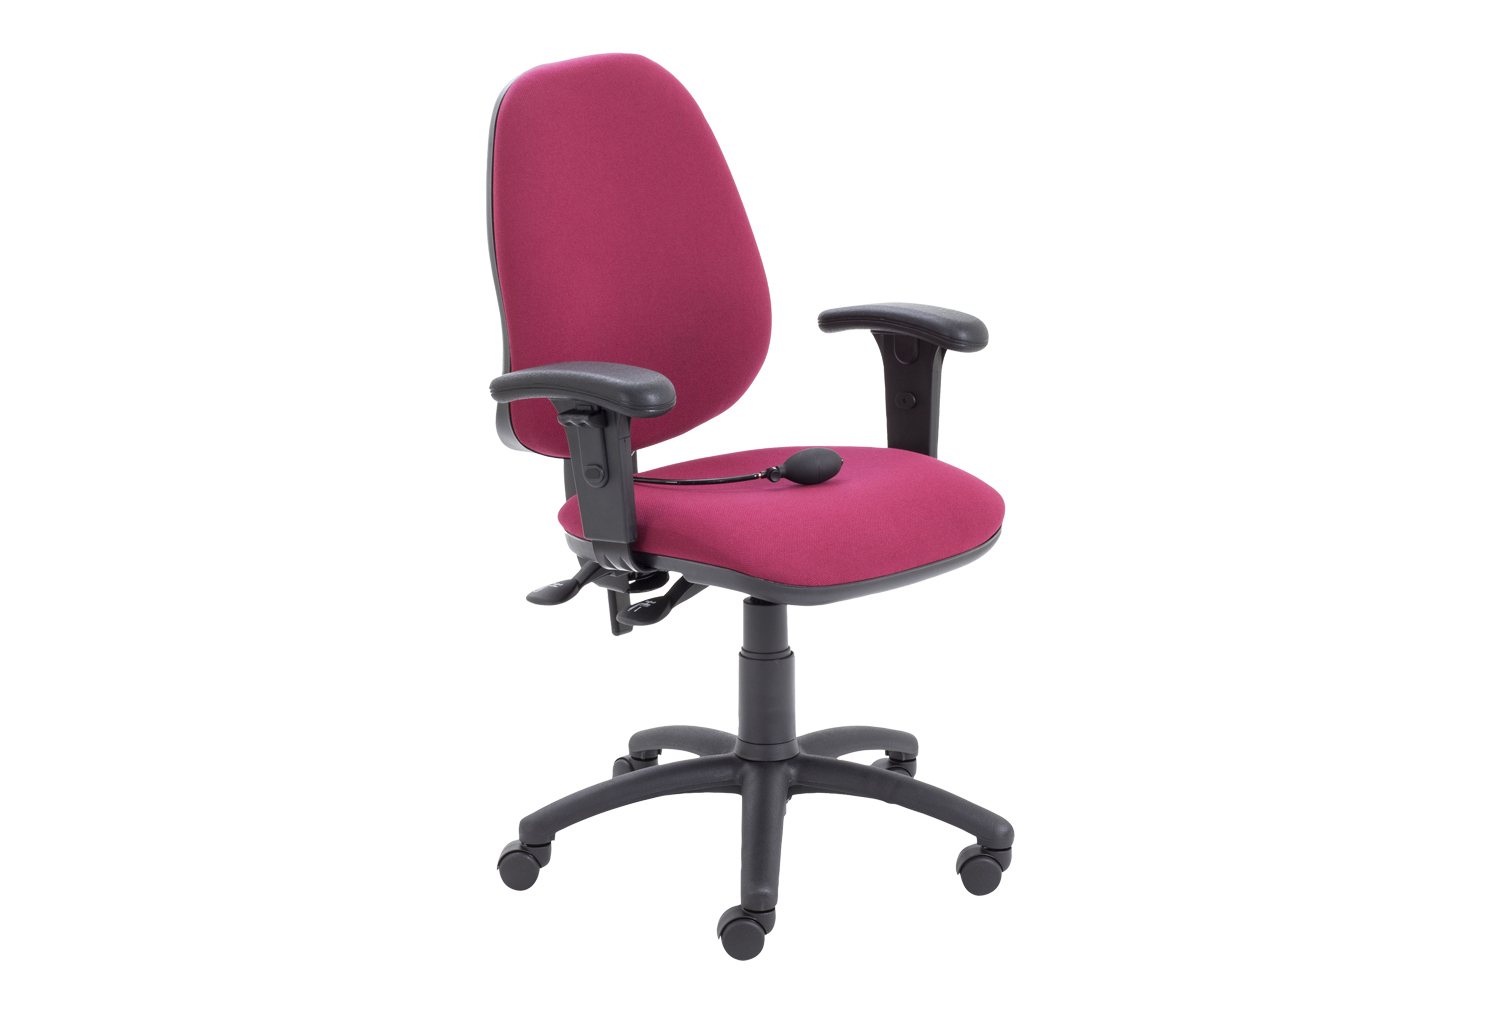 Orchid Lumbar Pump Ergonomic Operator Office Chair With Height Adjustable Arms, Burgundy